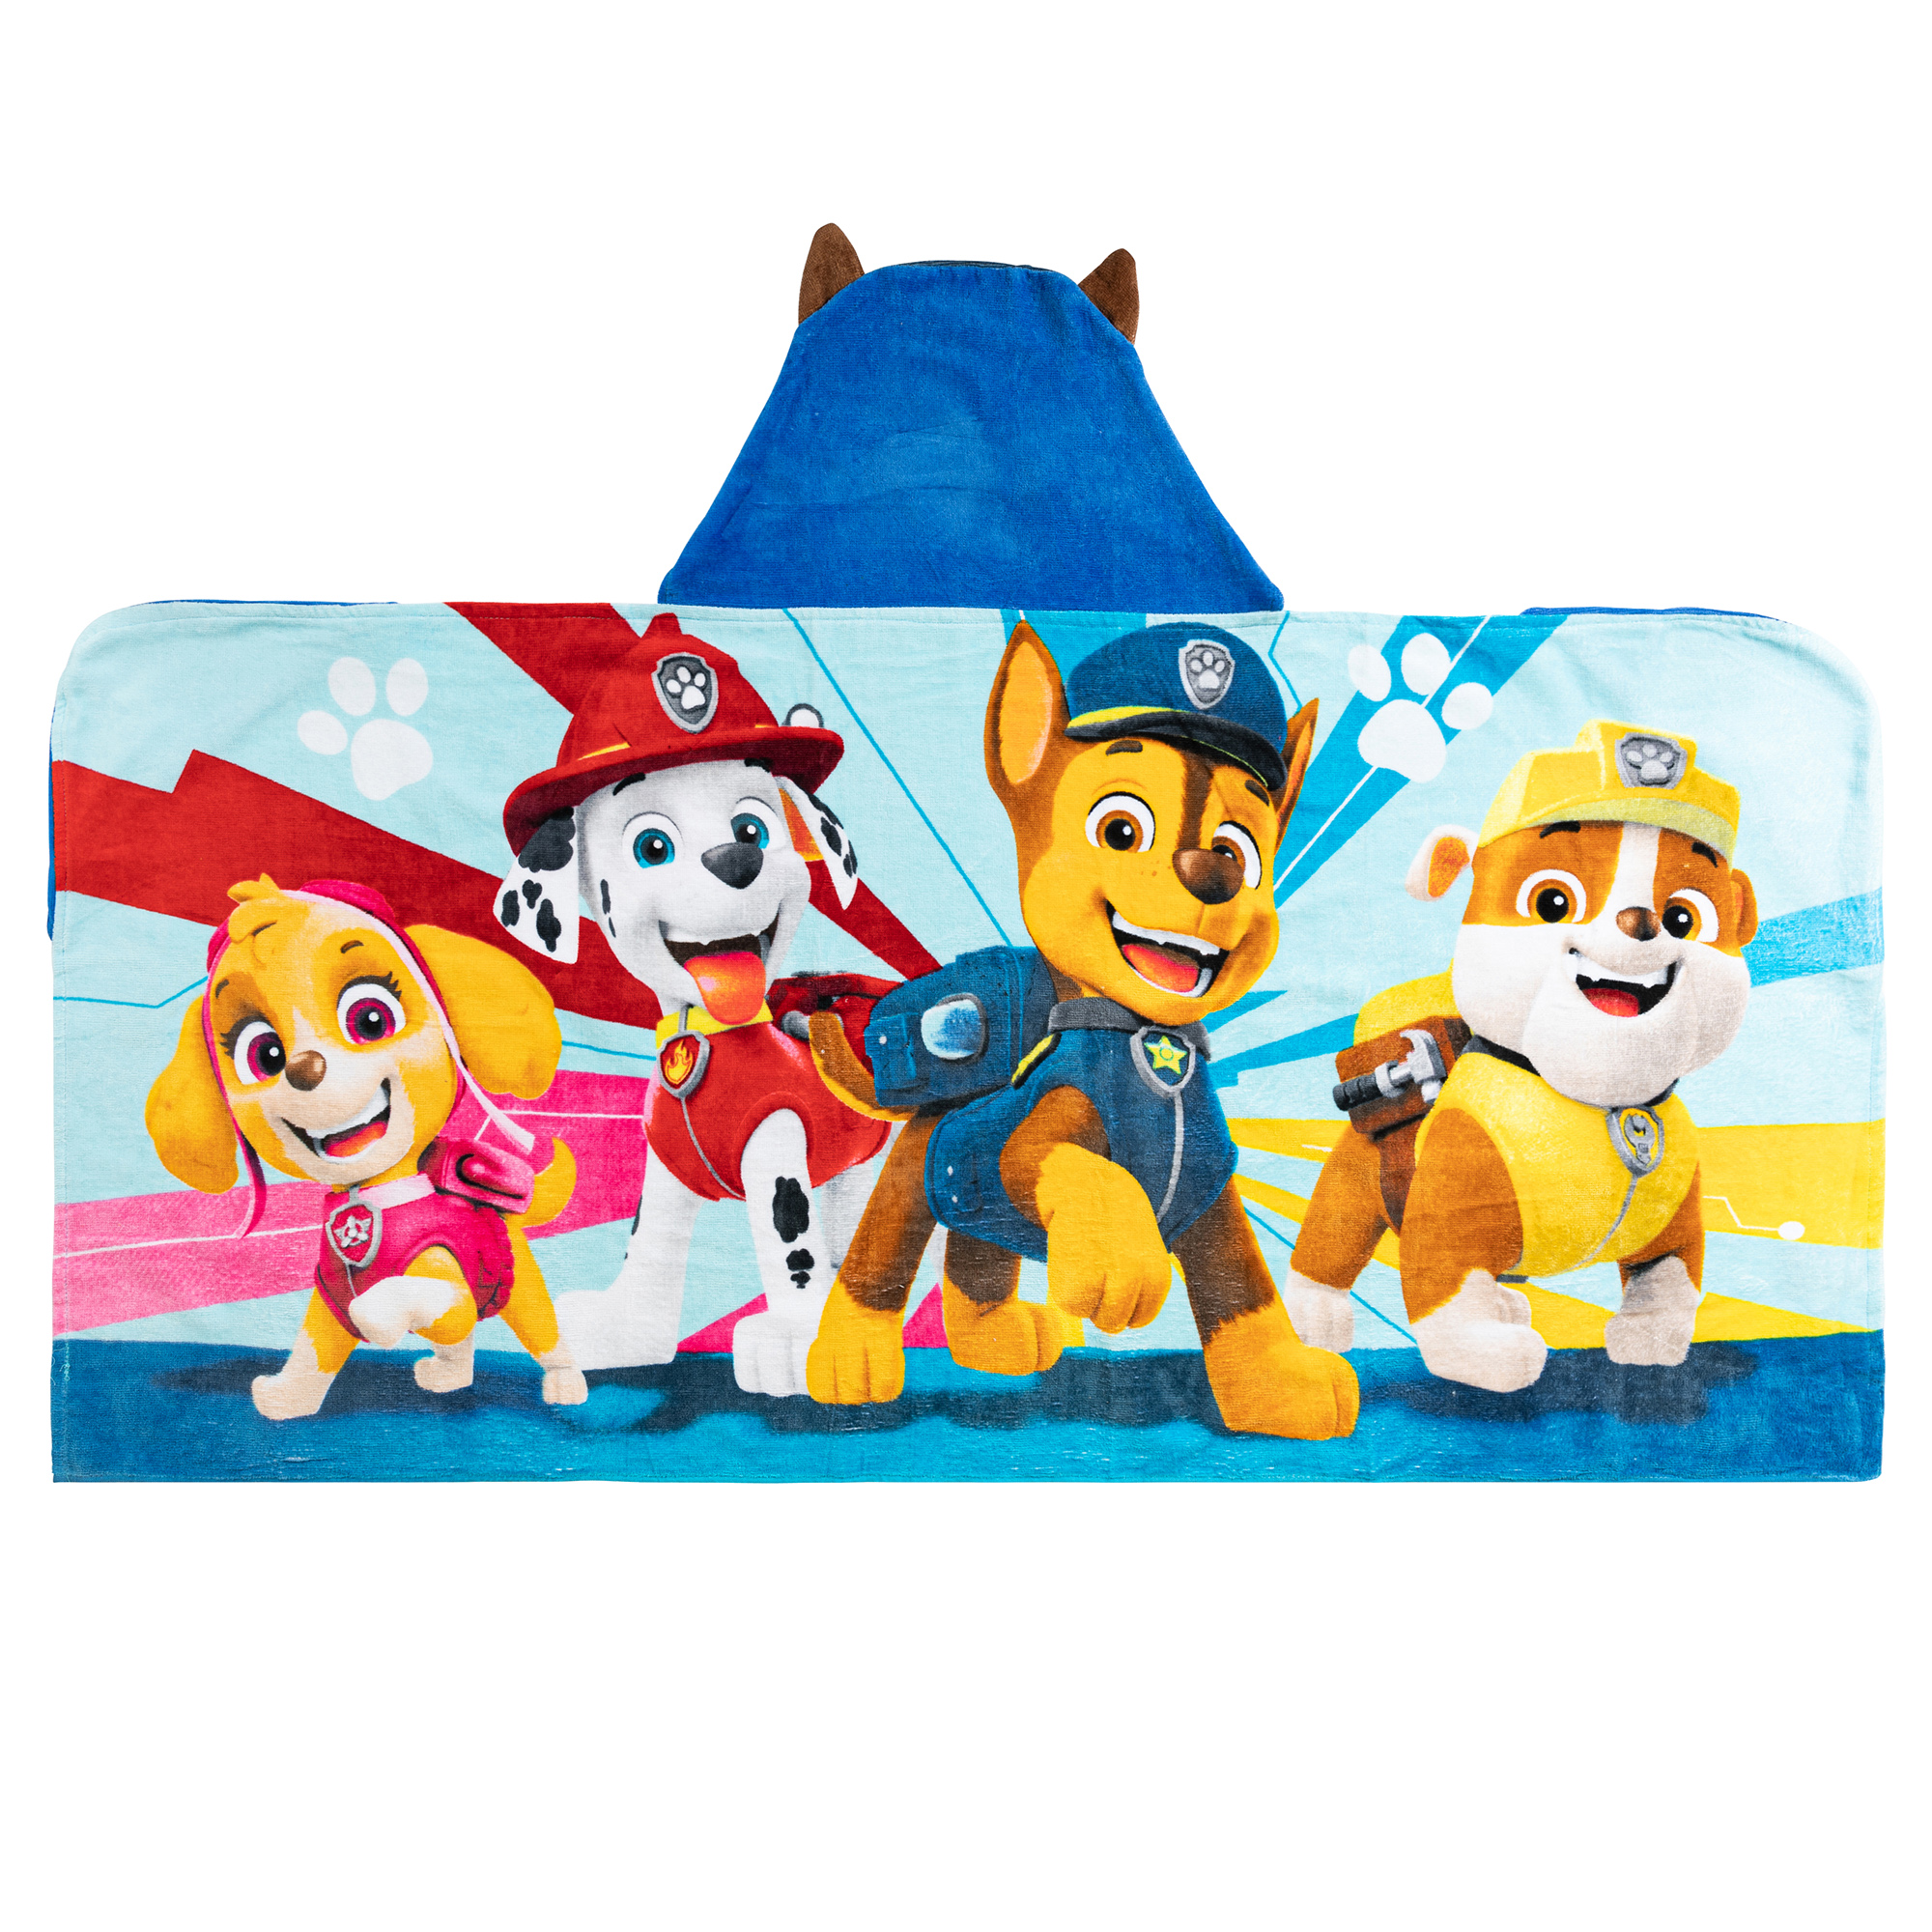 PAW Patrol Chase Kids Cotton Hooded Towel - image 3 of 6